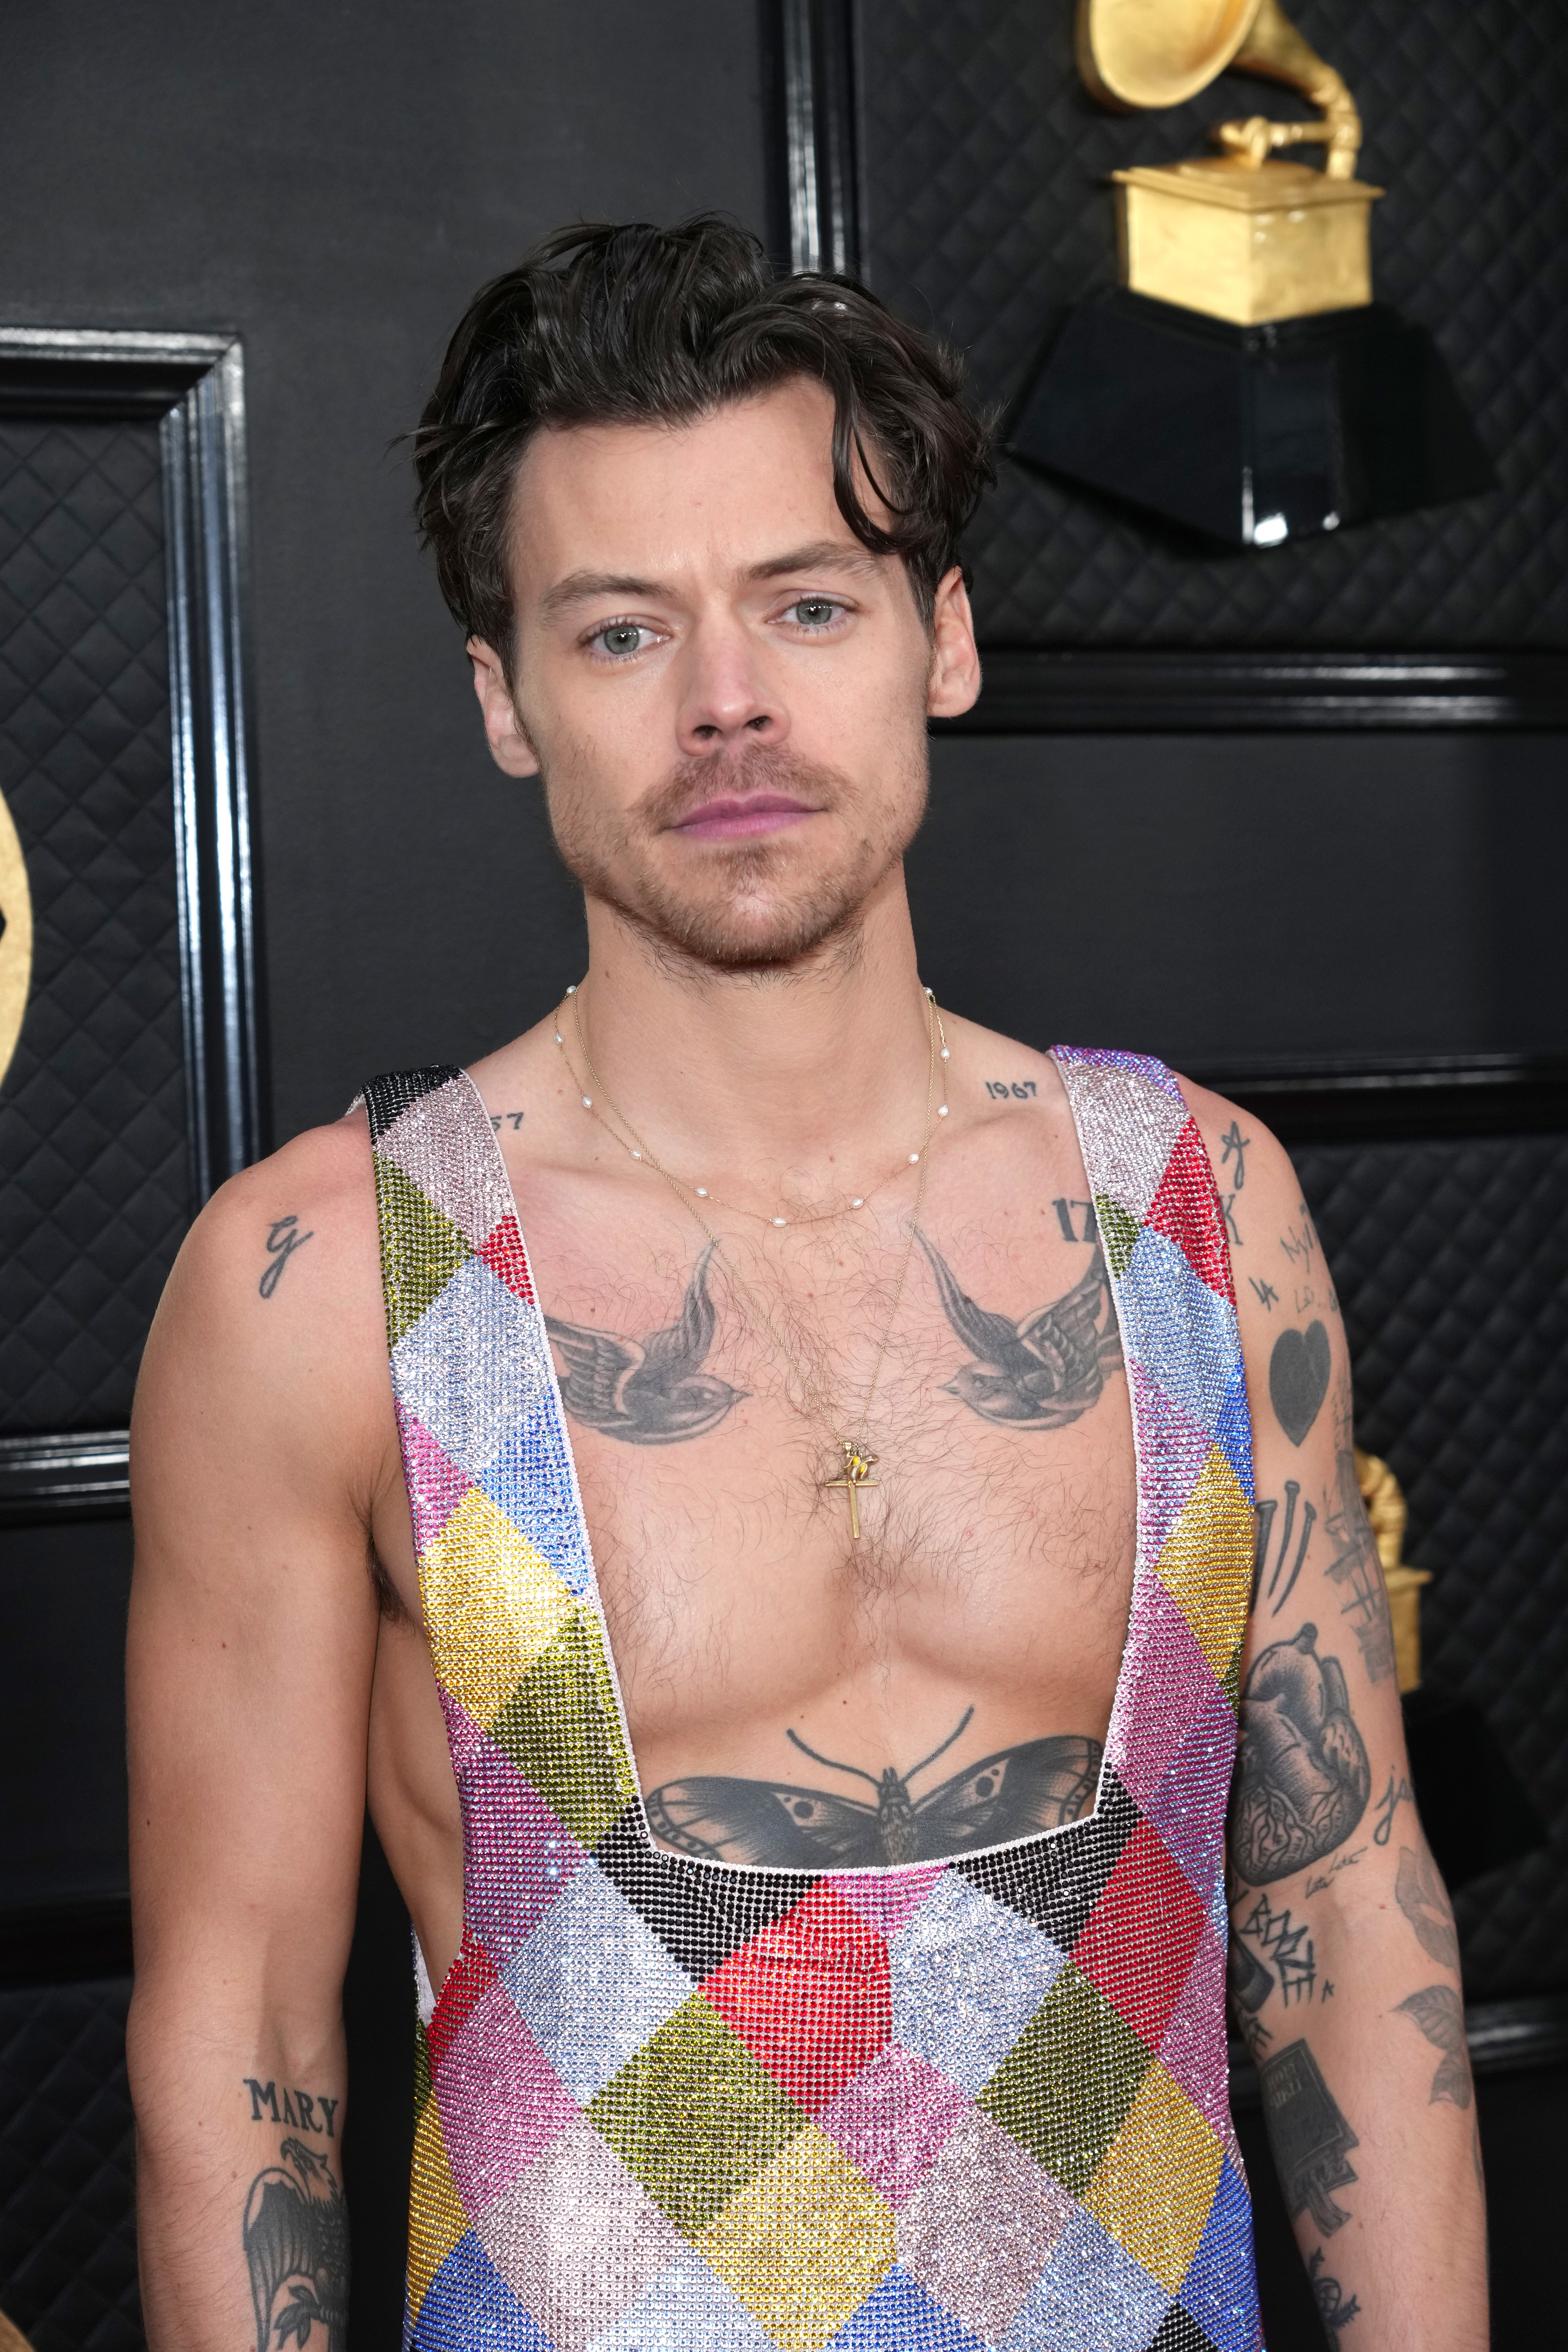 Closeup of Harry Styles at a media event in a sequined jumpsuit with a low-square cut in the front